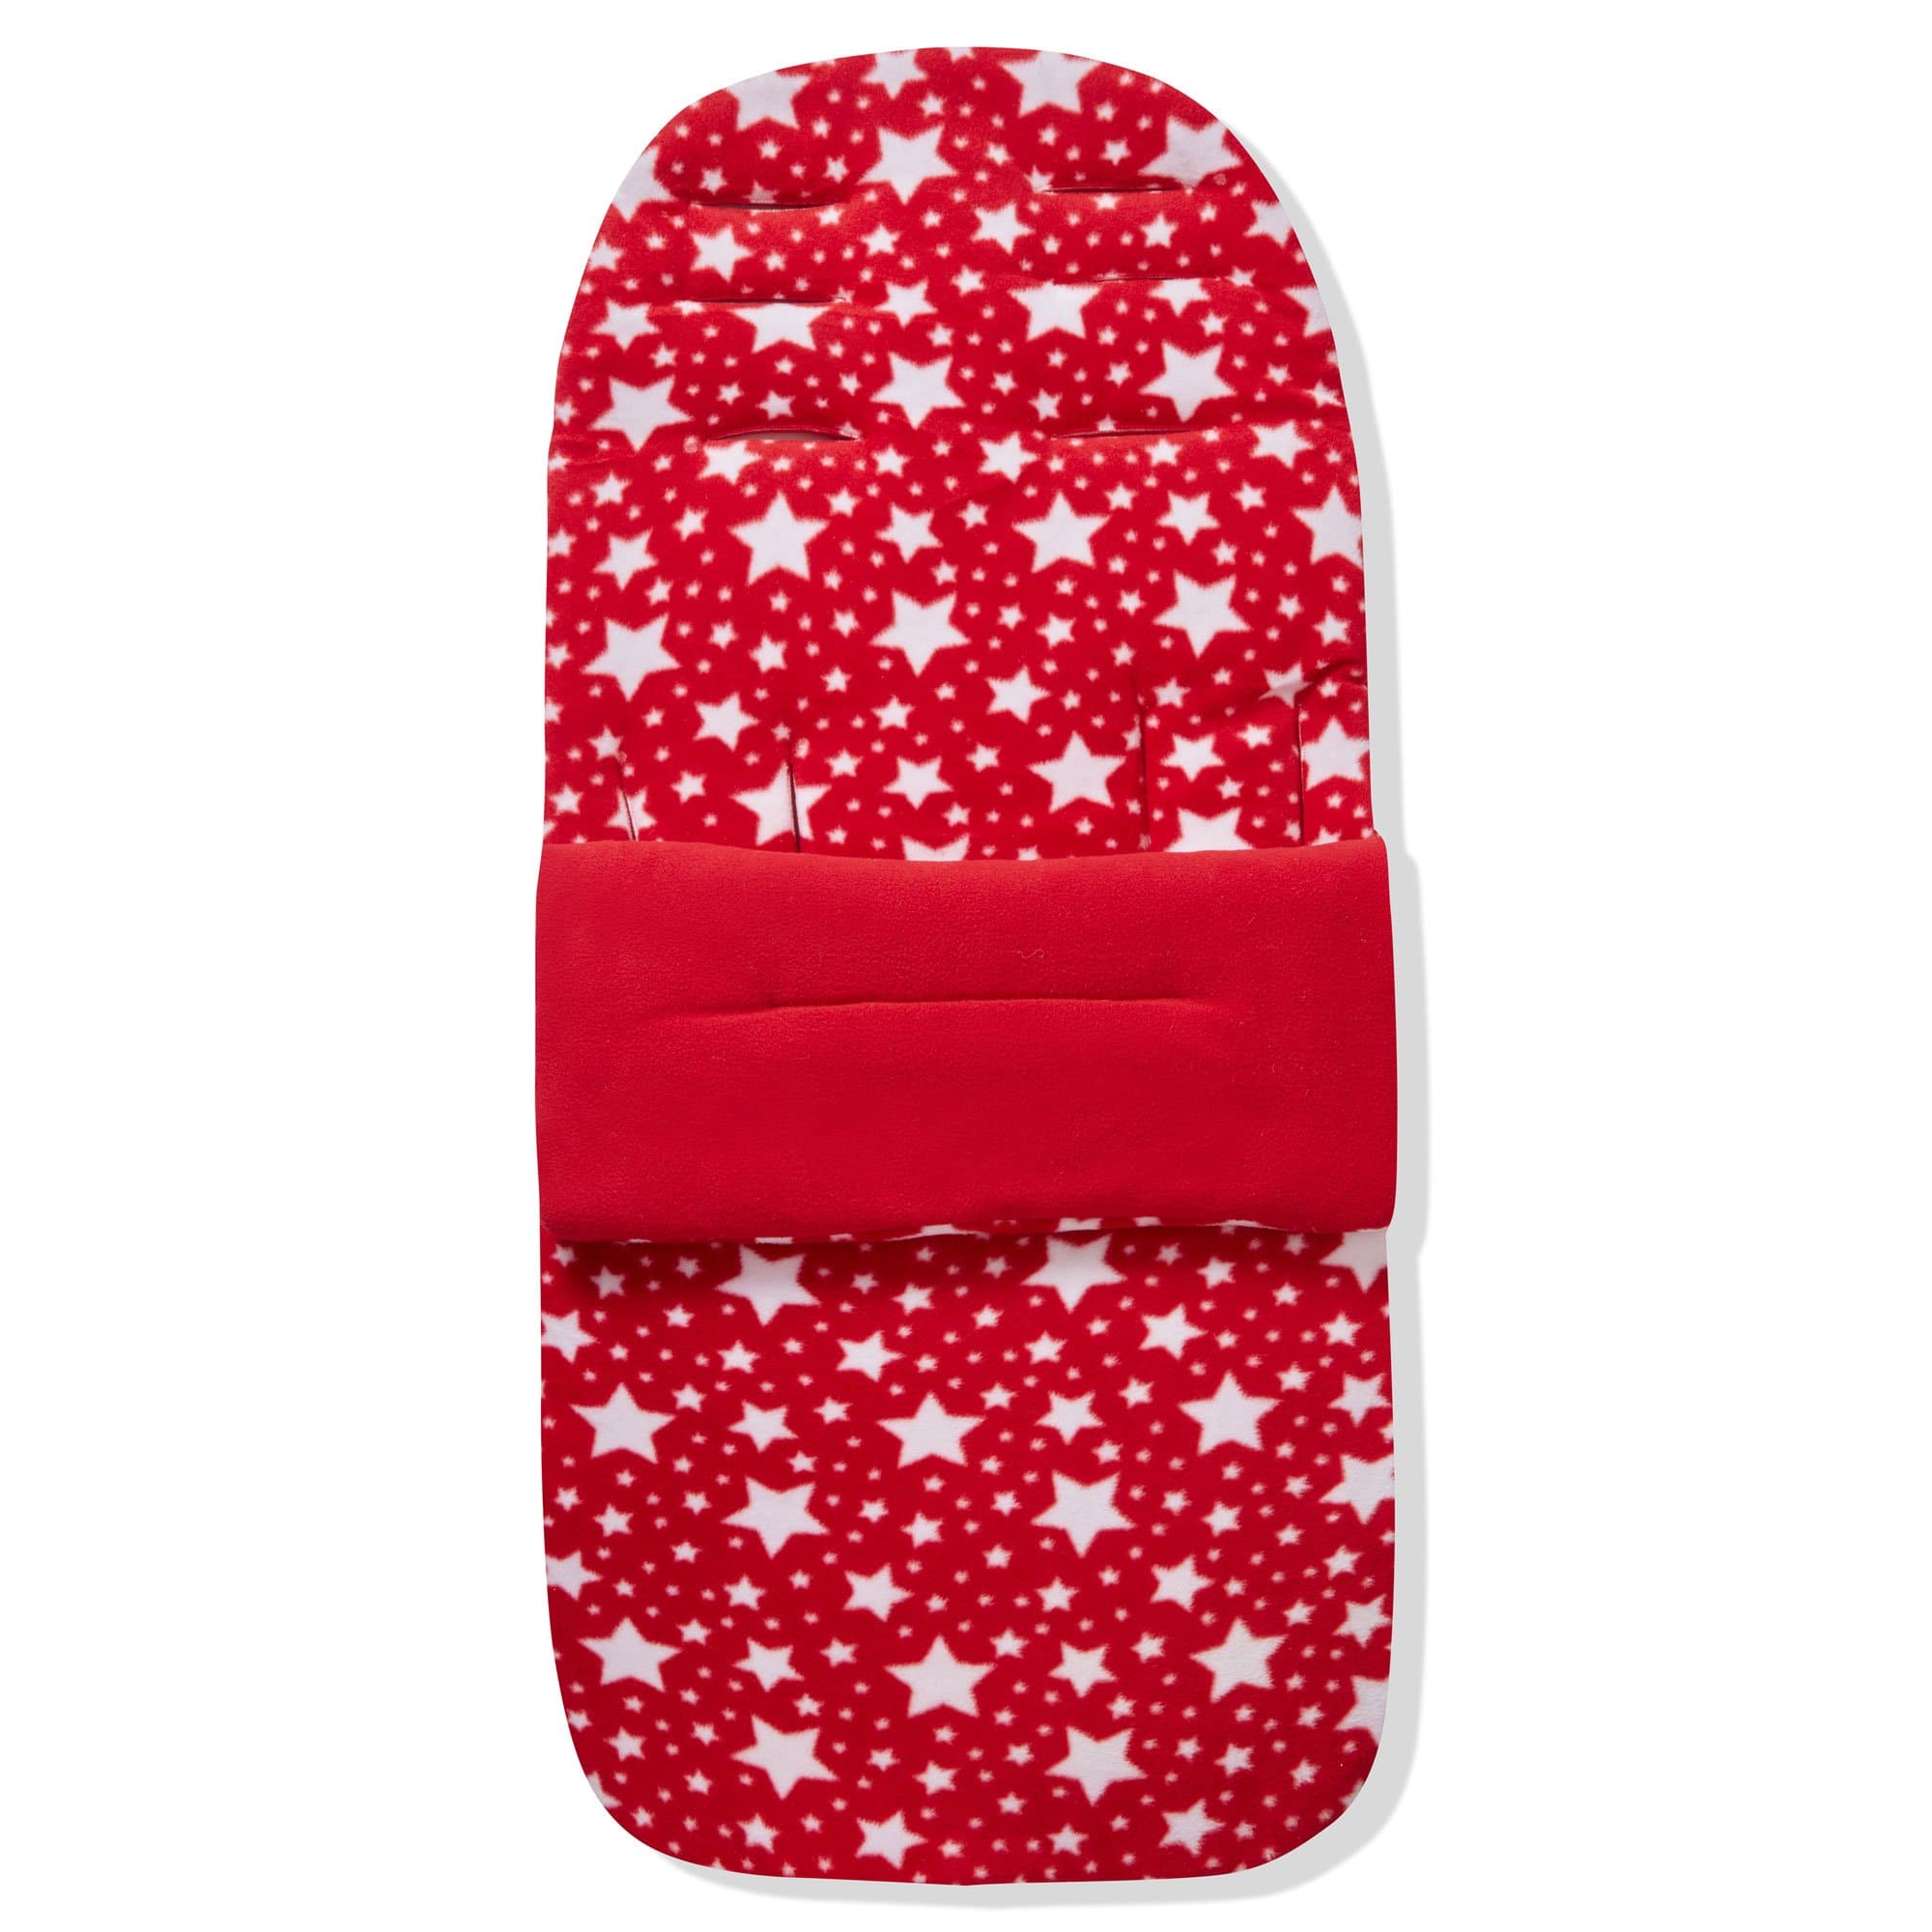 Fleece Footmuff / Cosy Toes Compatible with Egg - Red Star / Fits All Models | For Your Little One